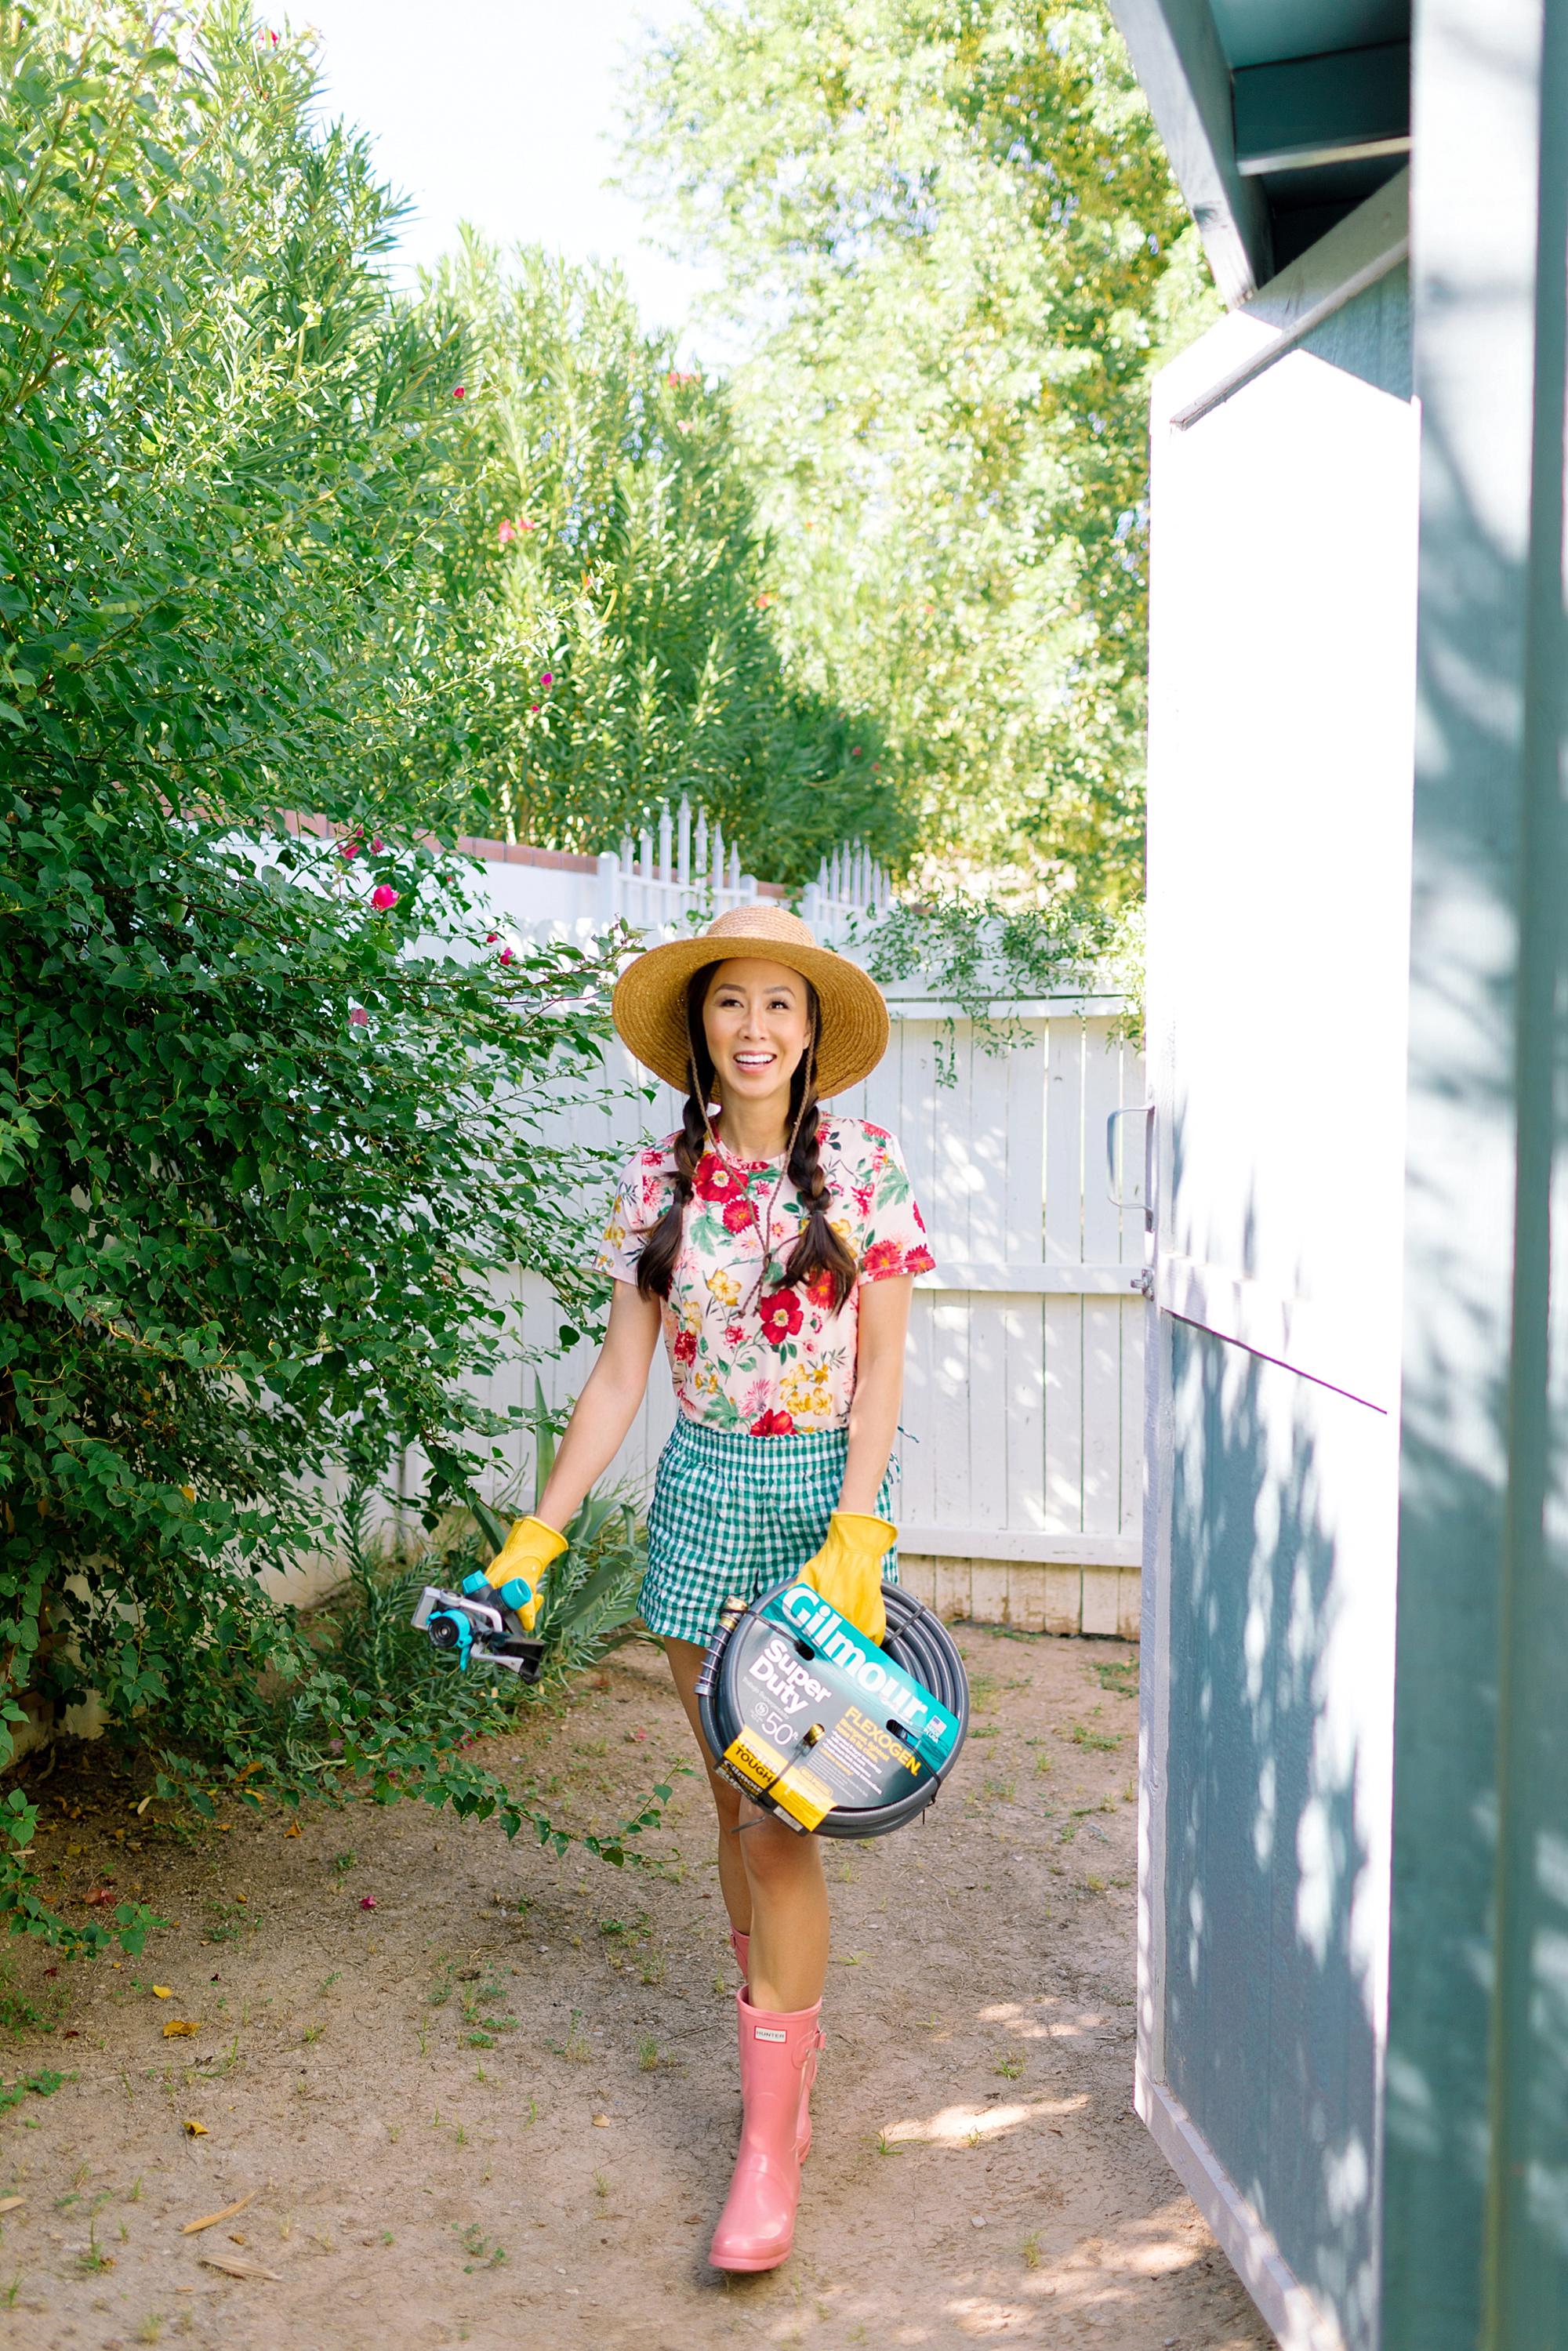 Garden preparation with Fiskars and Gilmour flexogen hose with tool shed tour garden lifestyle blogger Diana Elizabeth phoenix arizona wearing floral shirt and gingham shorts